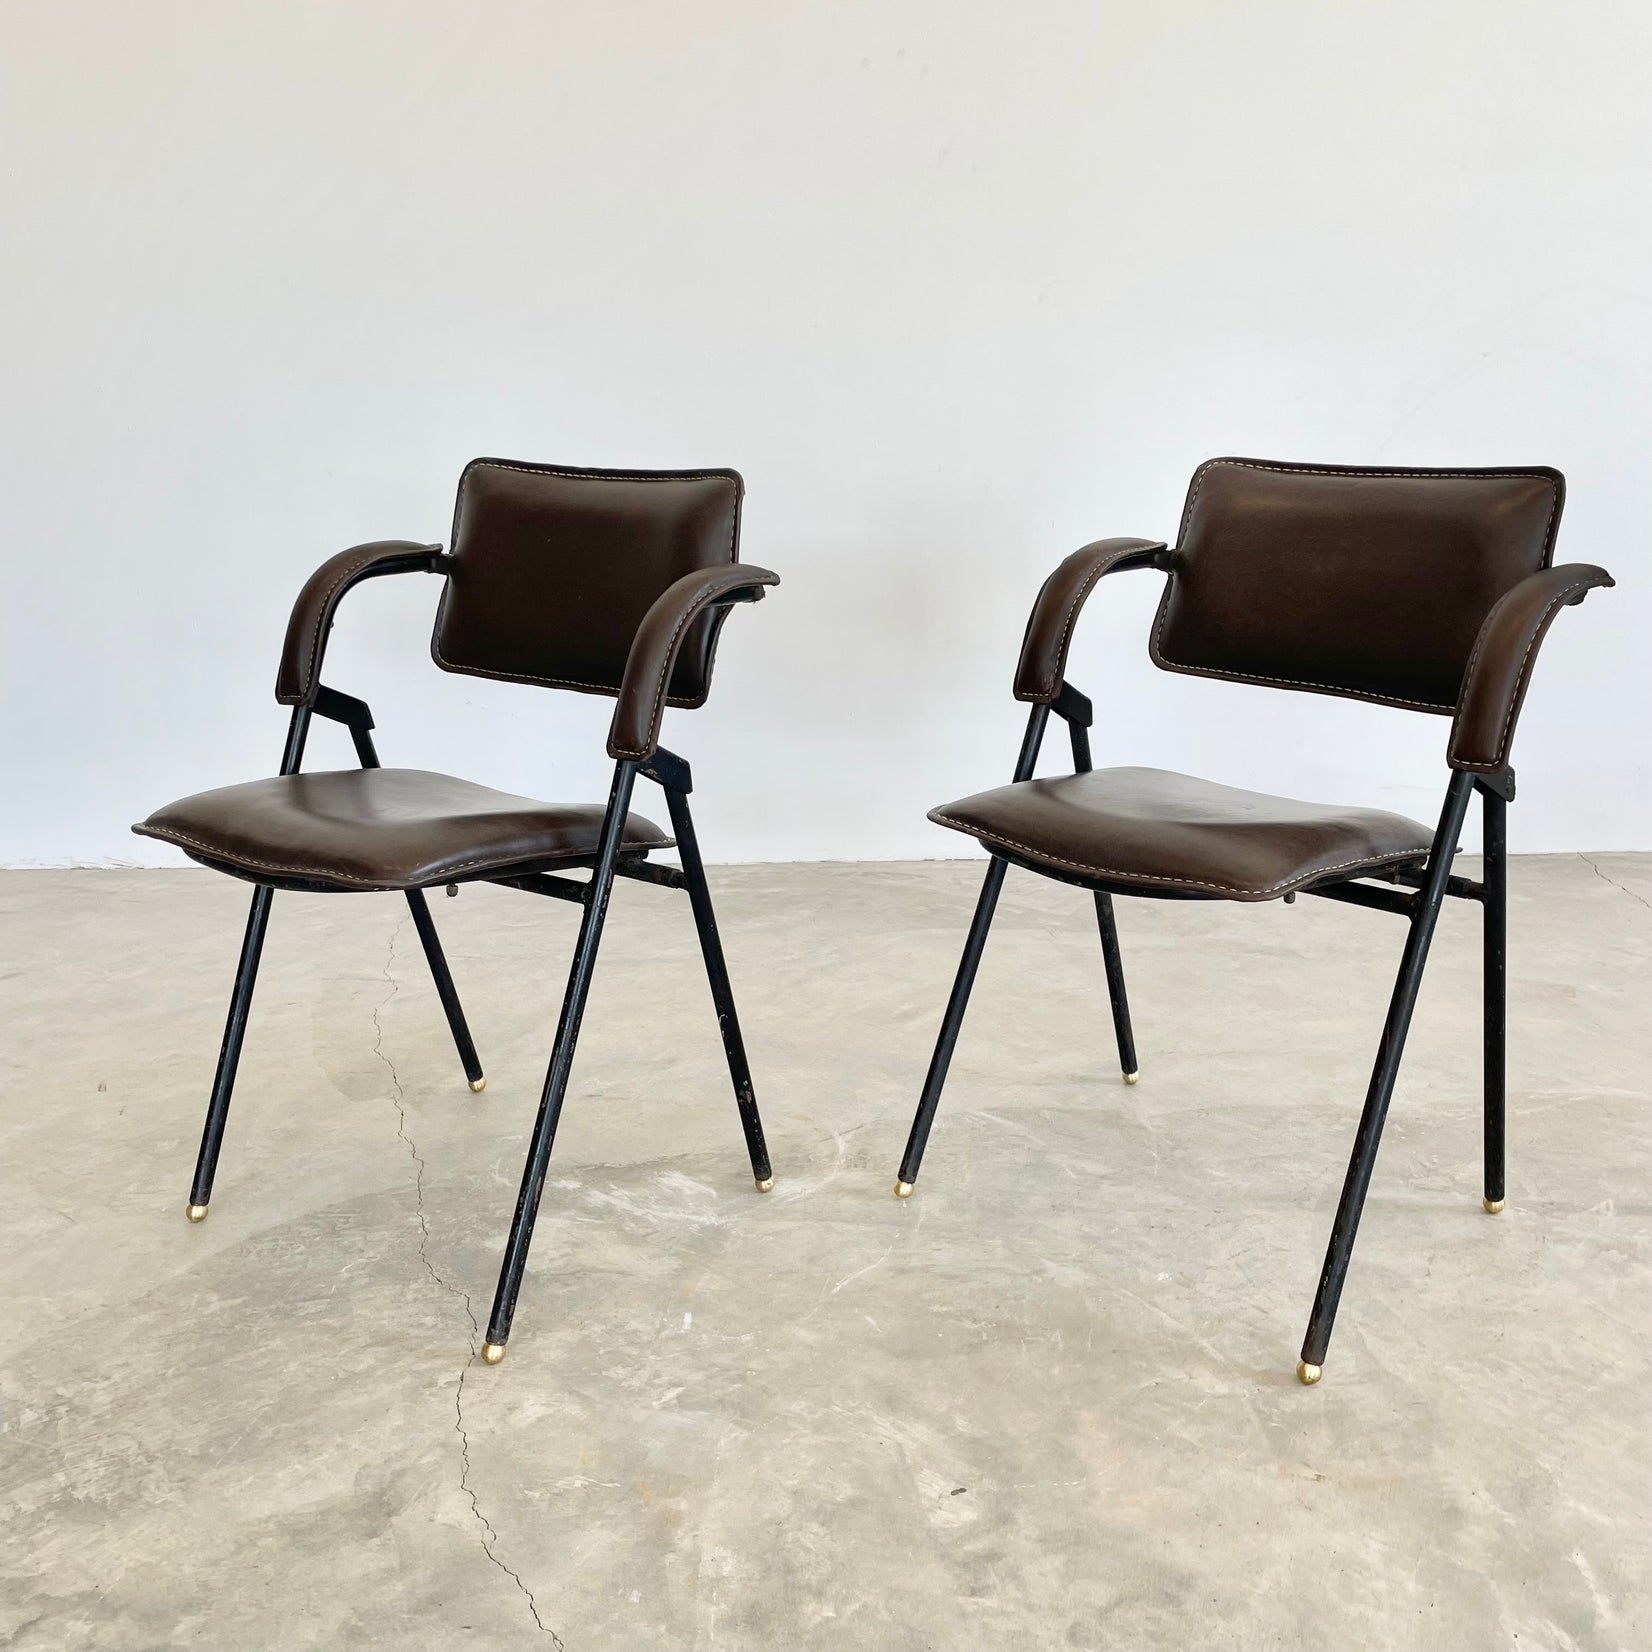 Jacques Adnet Armchair, 1950s France